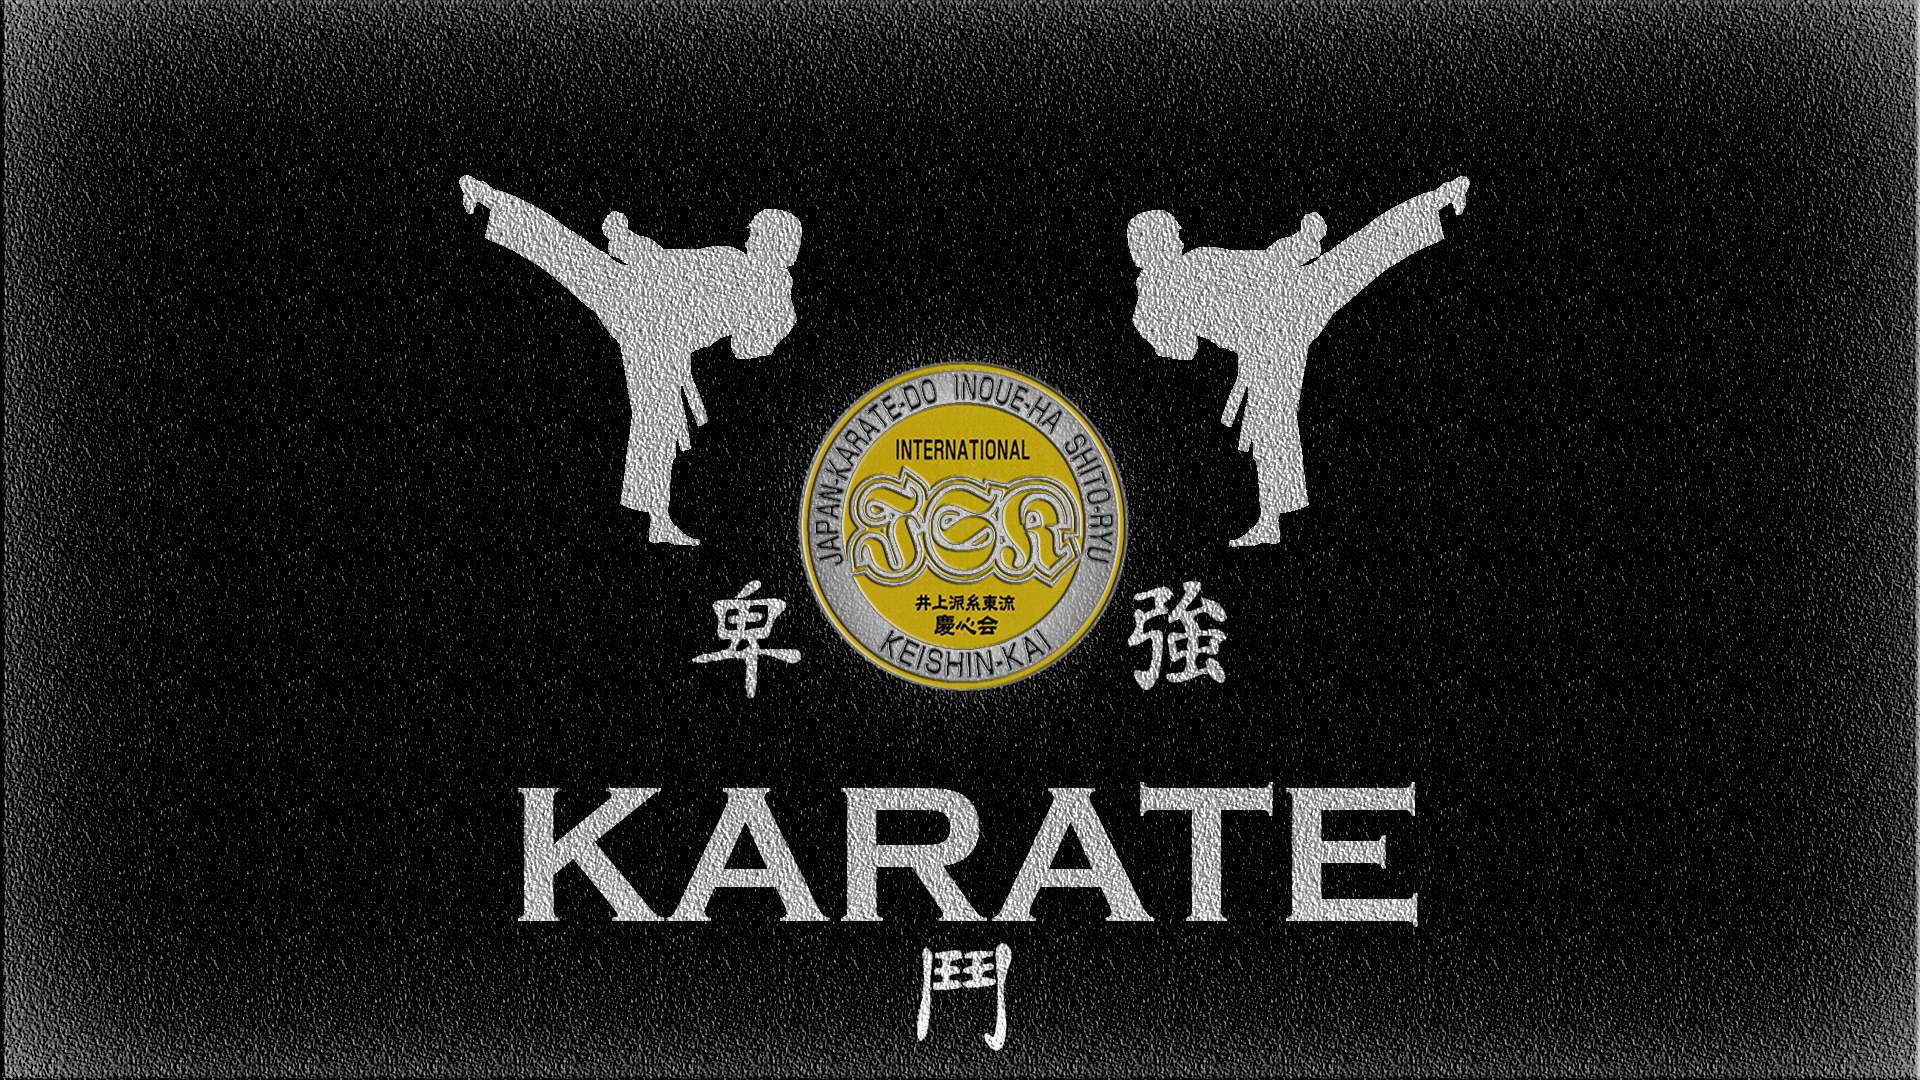 karate wallpapers INOUE-HA SHITO RYU 1920 - 1080 A by jfreefm on ...